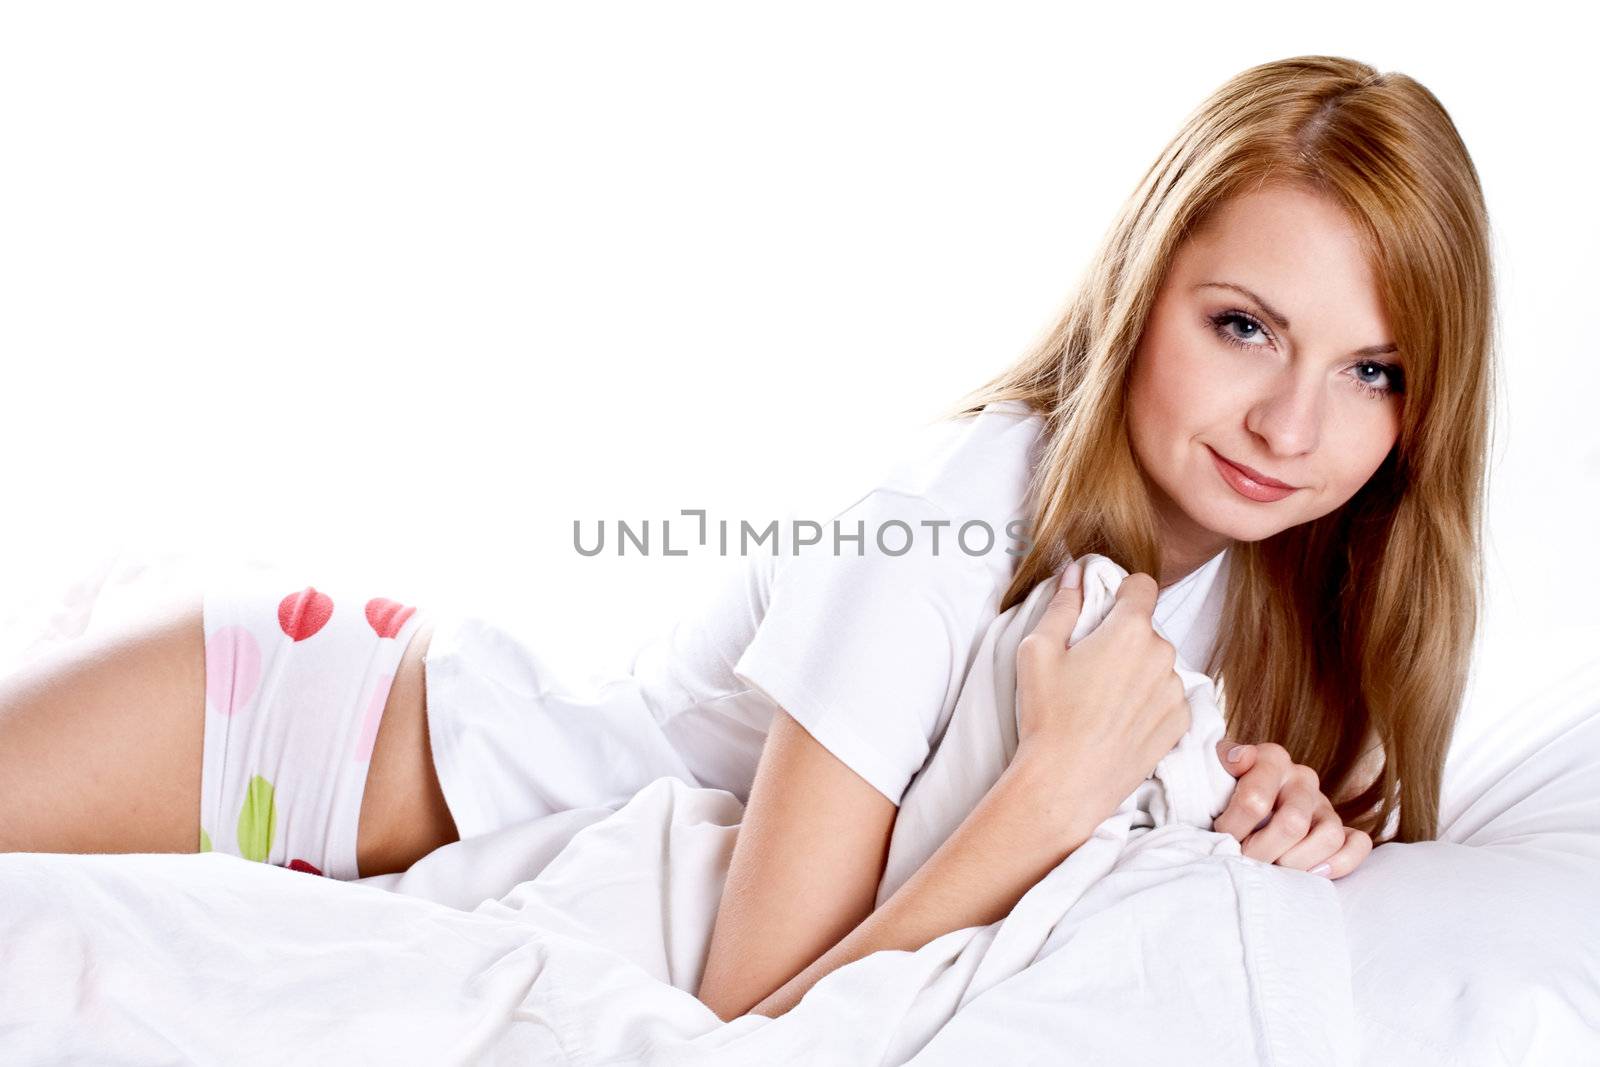 woman lying in bedroom smiling on a white background